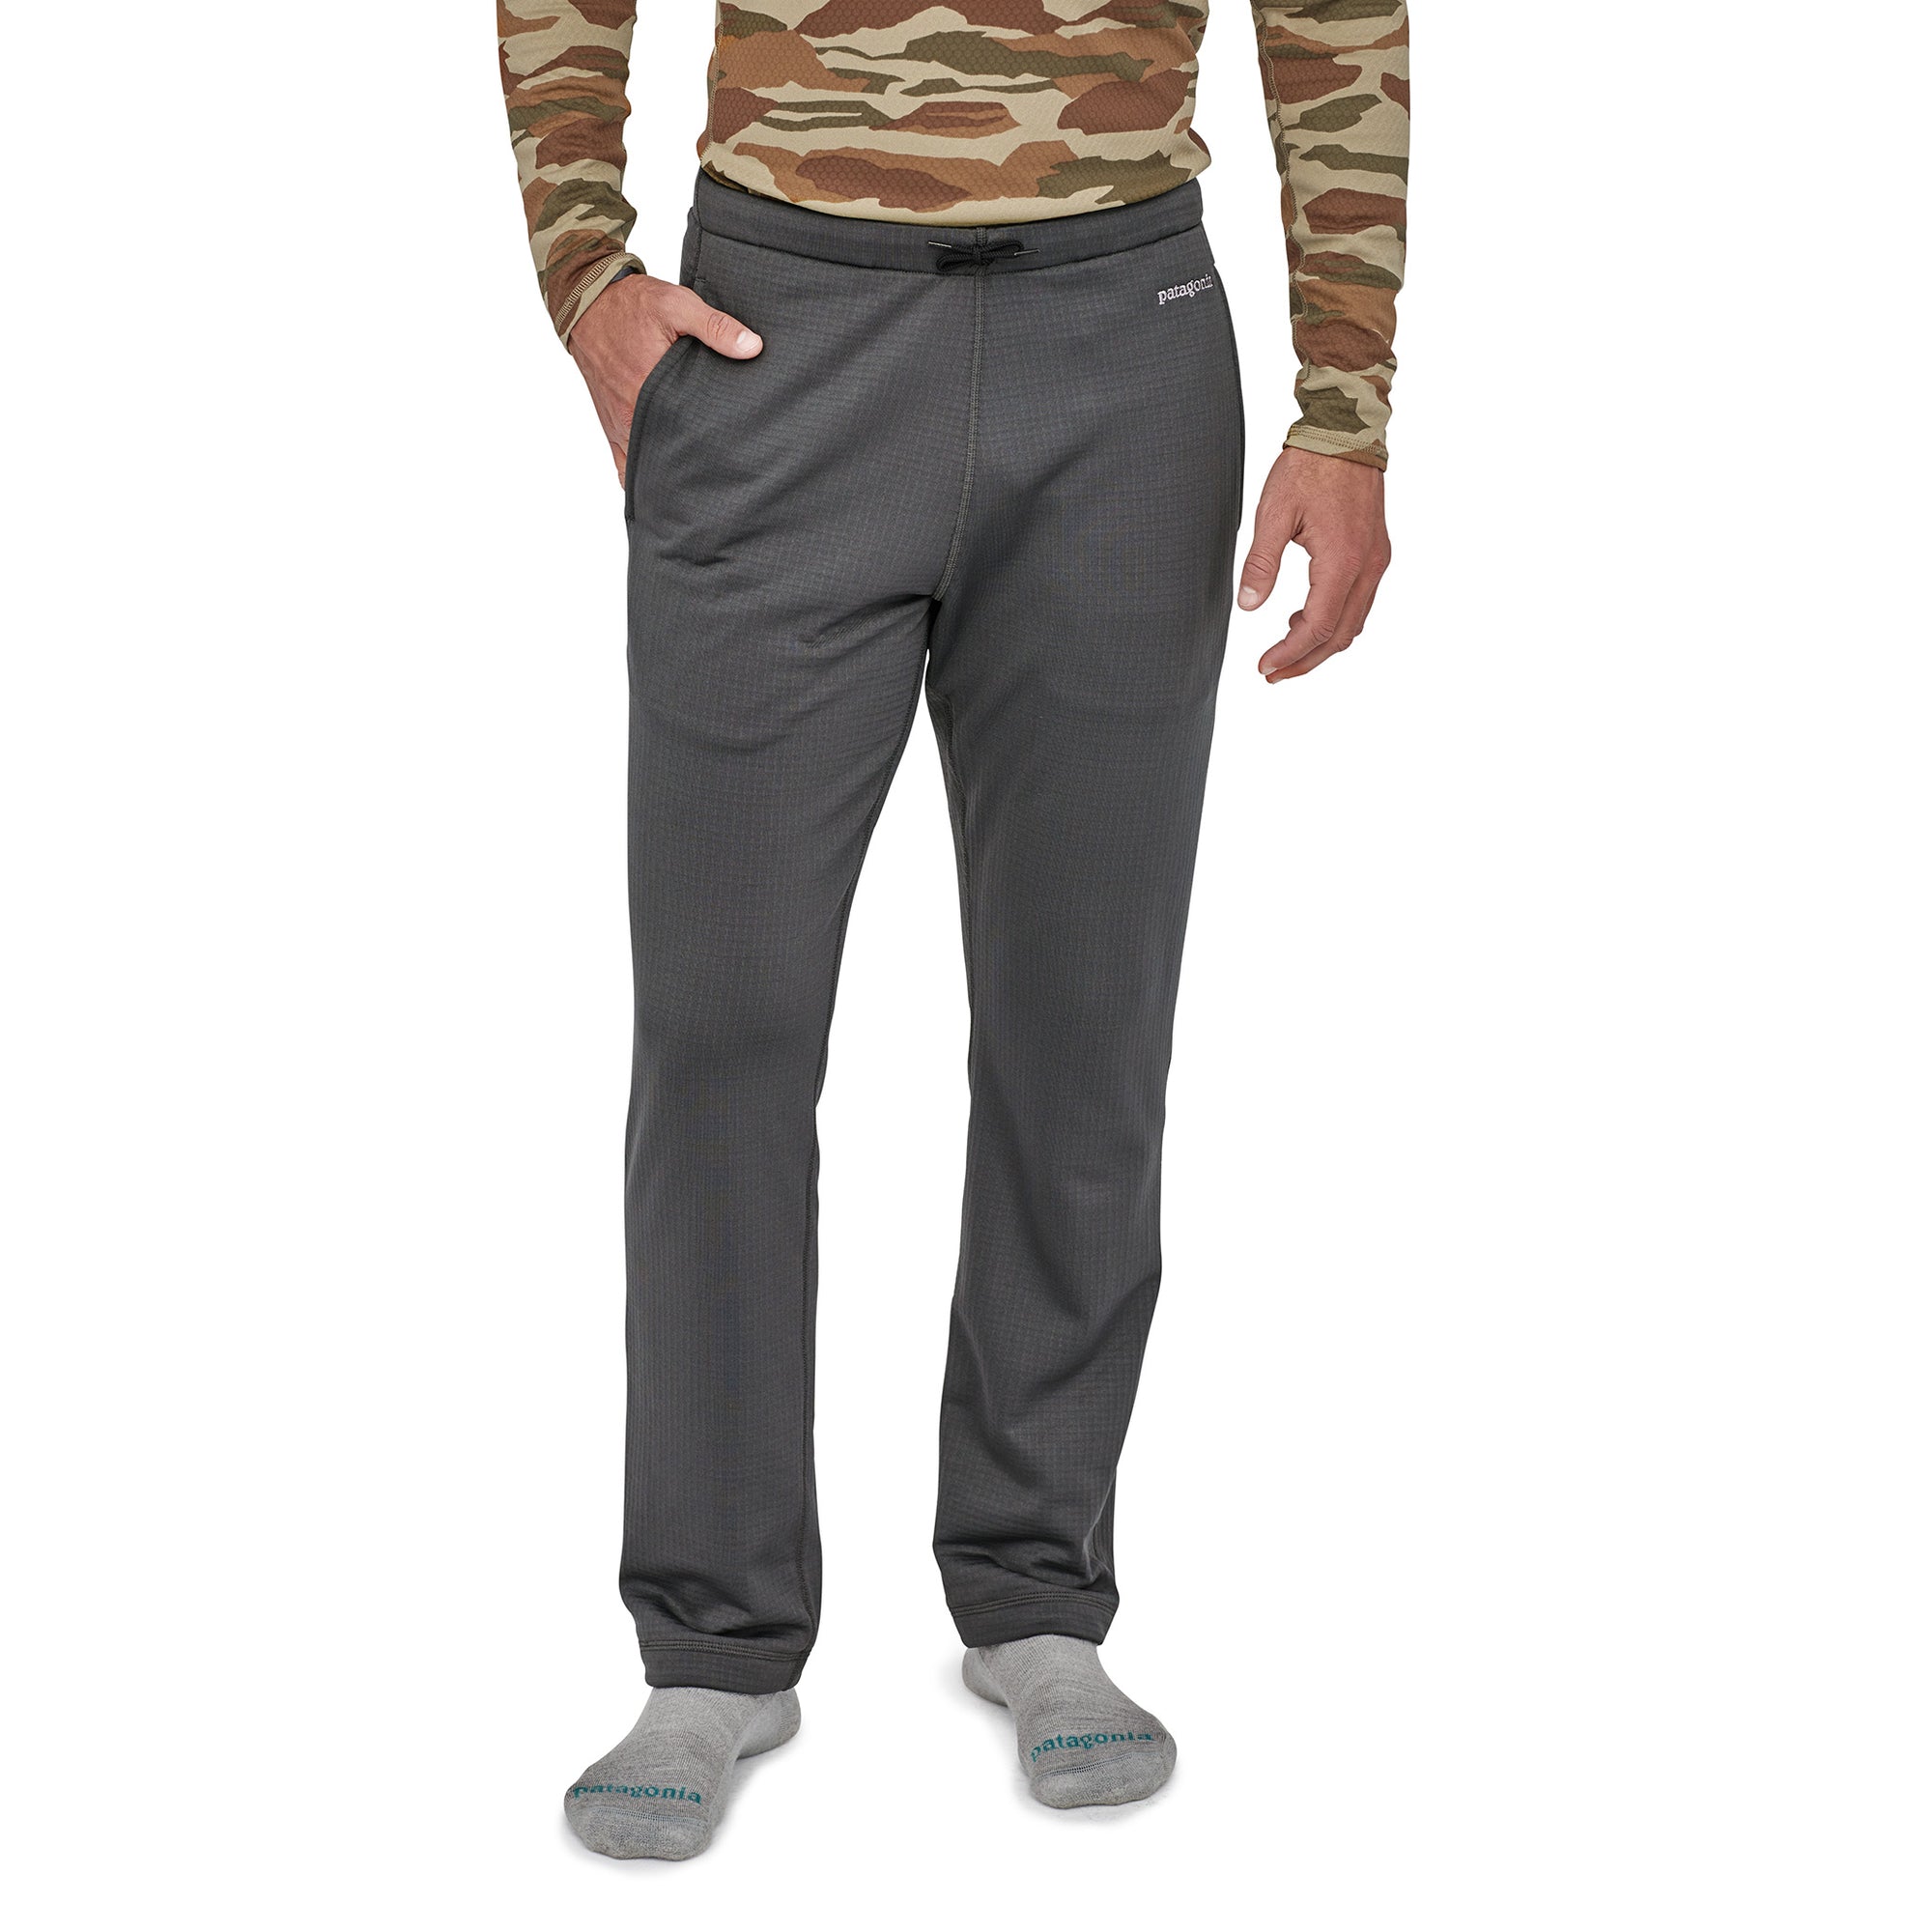 patagonia mens r1 pants in forge grey, front view on a model